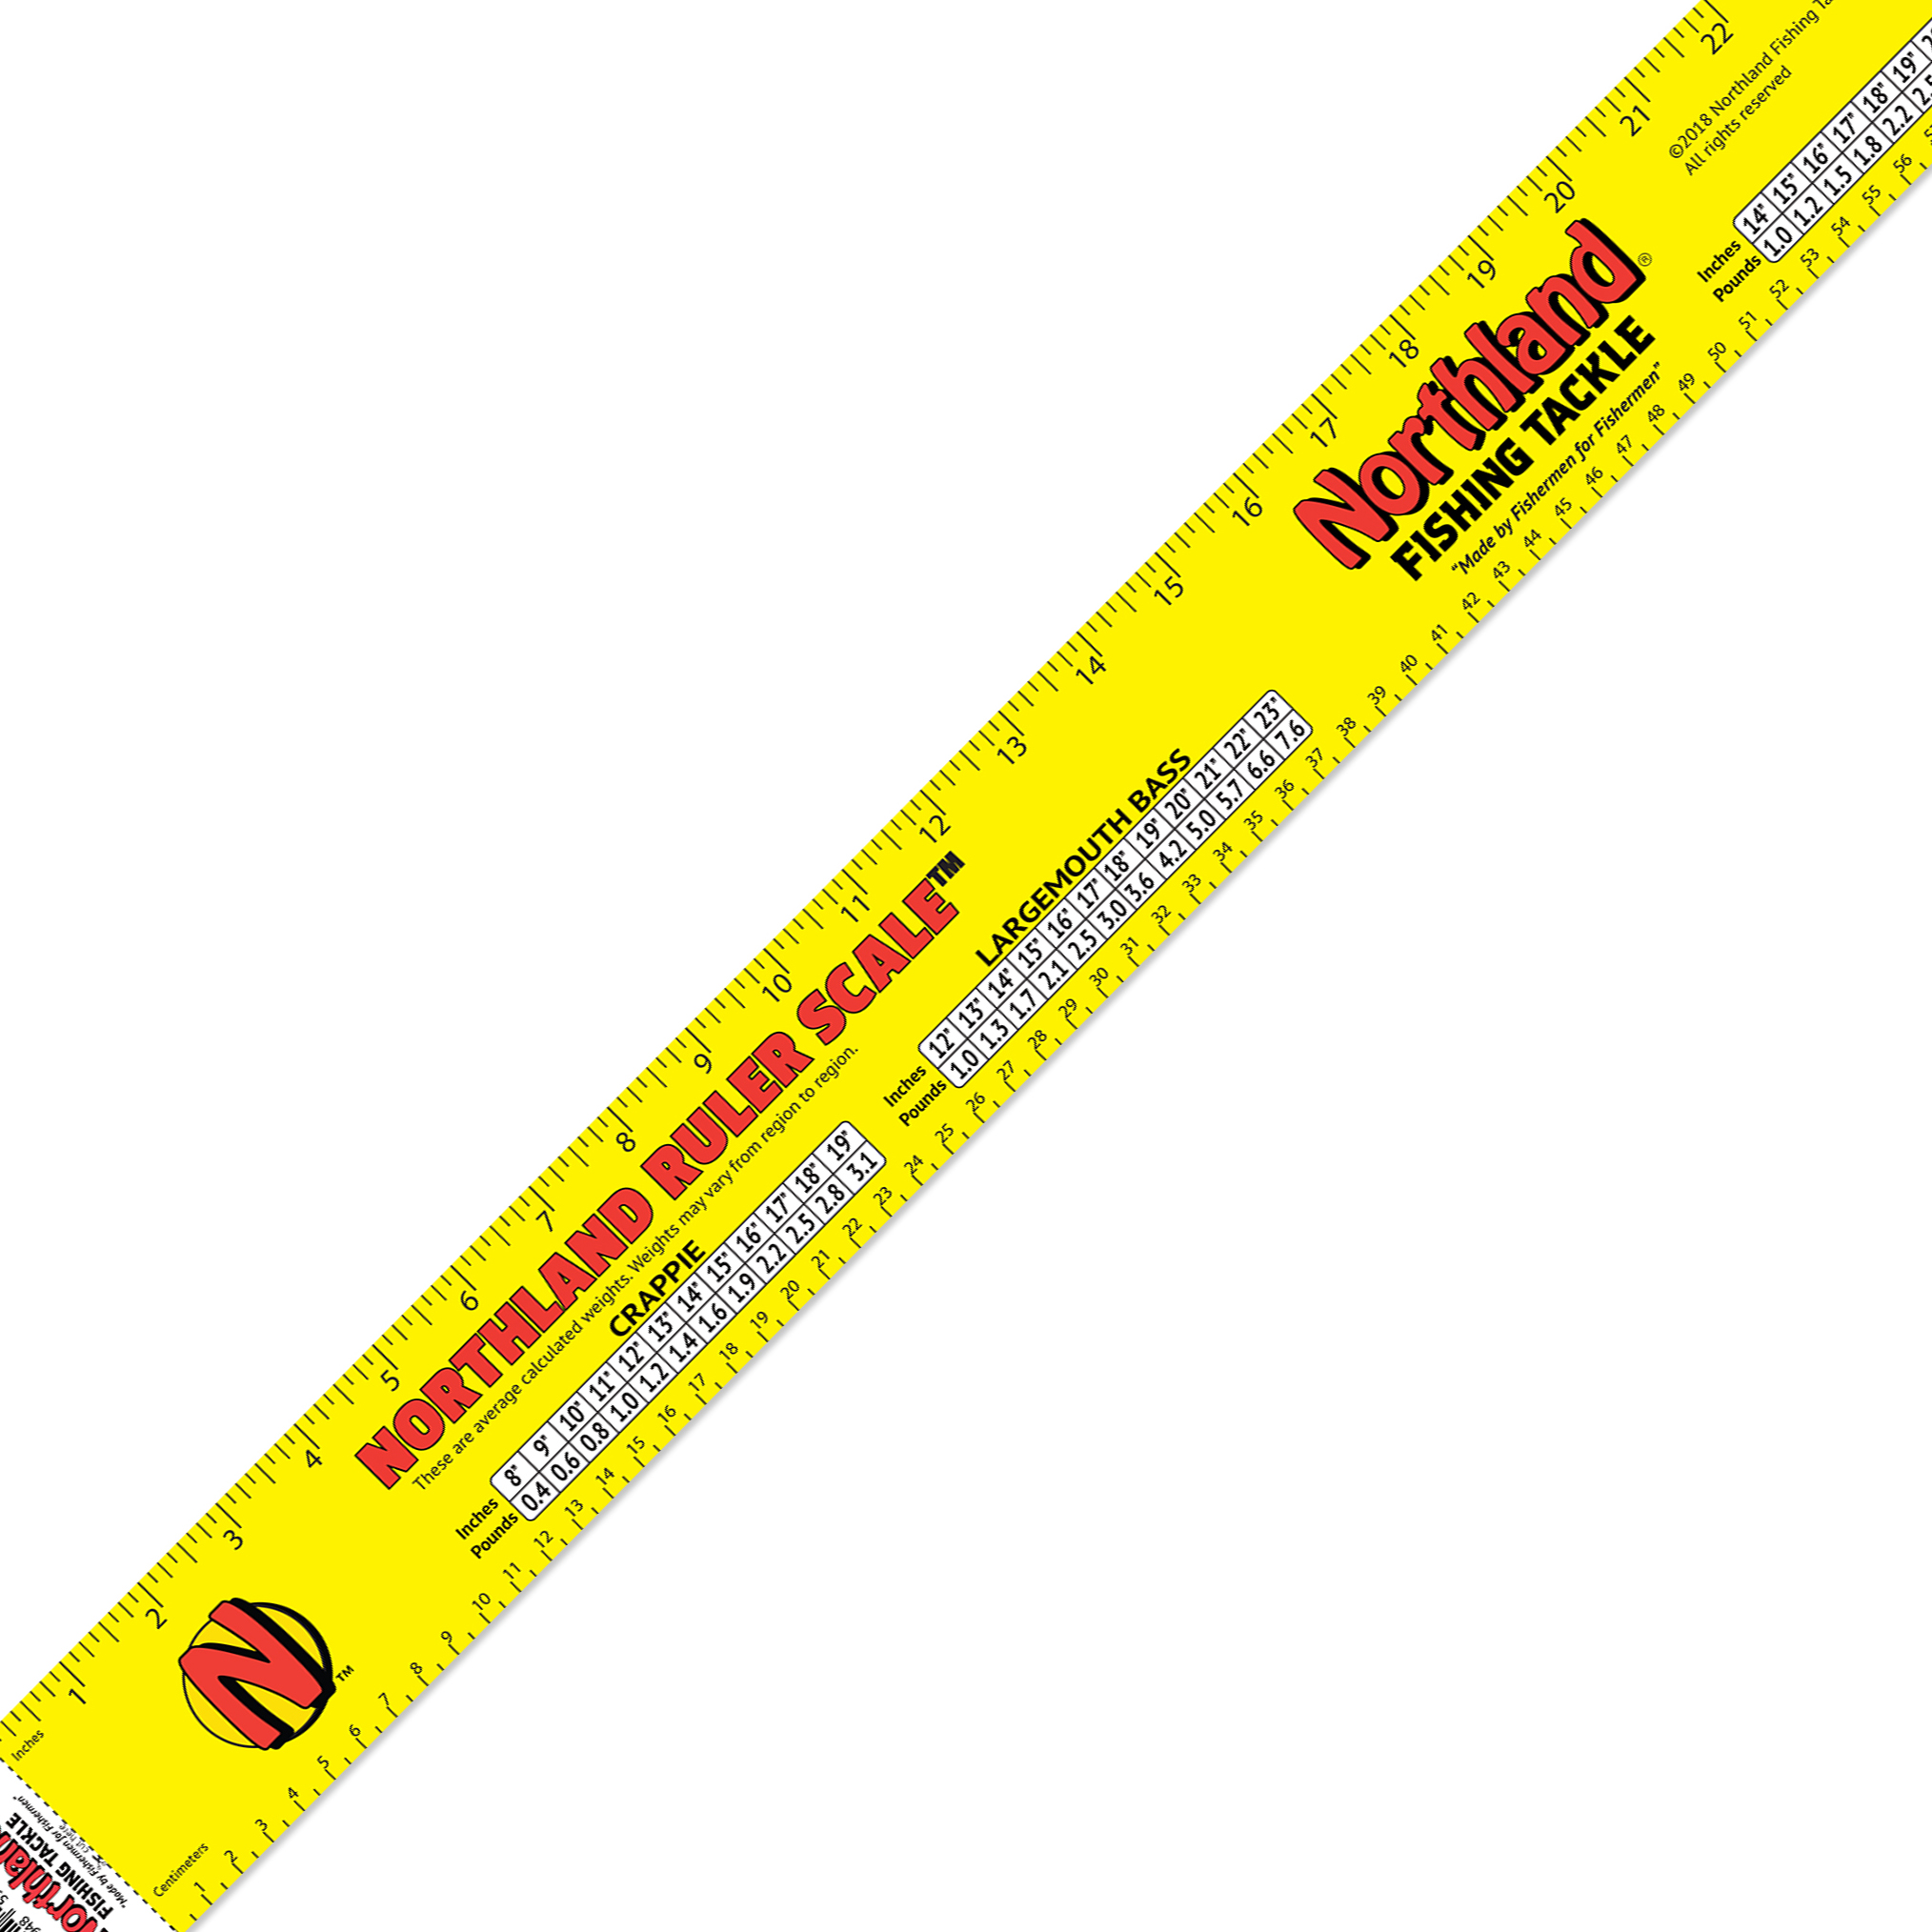 Northland Tackle Ruler Scale Sticker, Freshwater, Yellow, Measuring Device - image 2 of 8